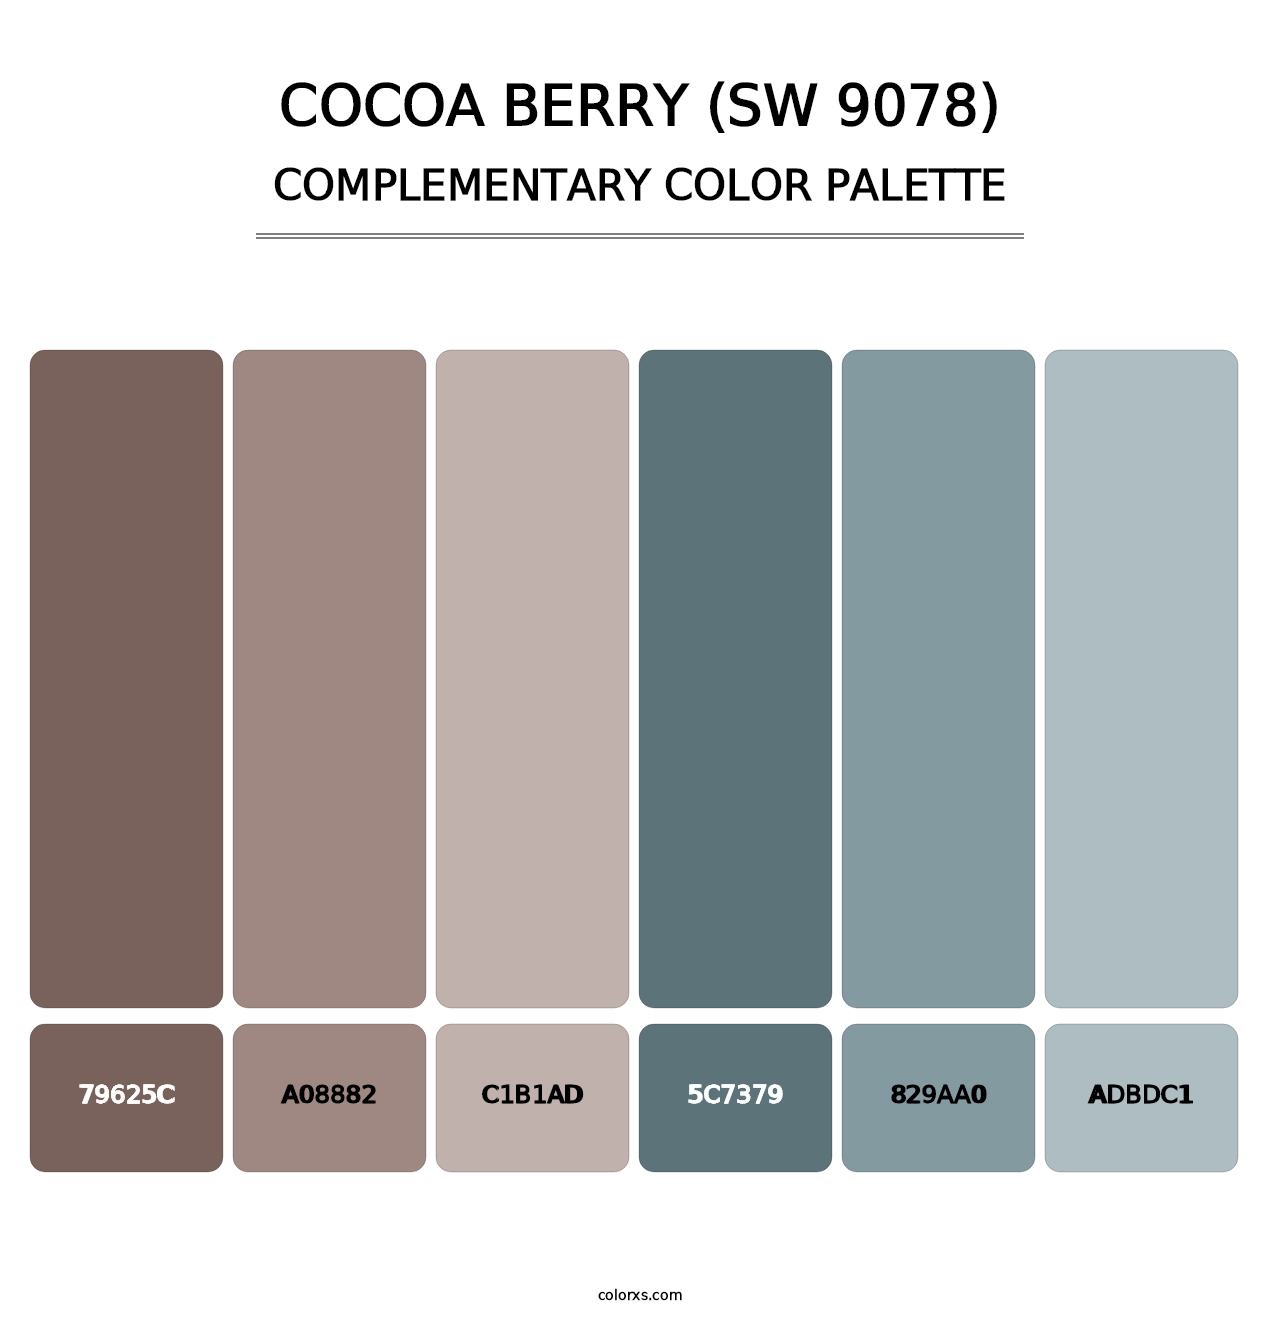 Cocoa Berry (SW 9078) - Complementary Color Palette